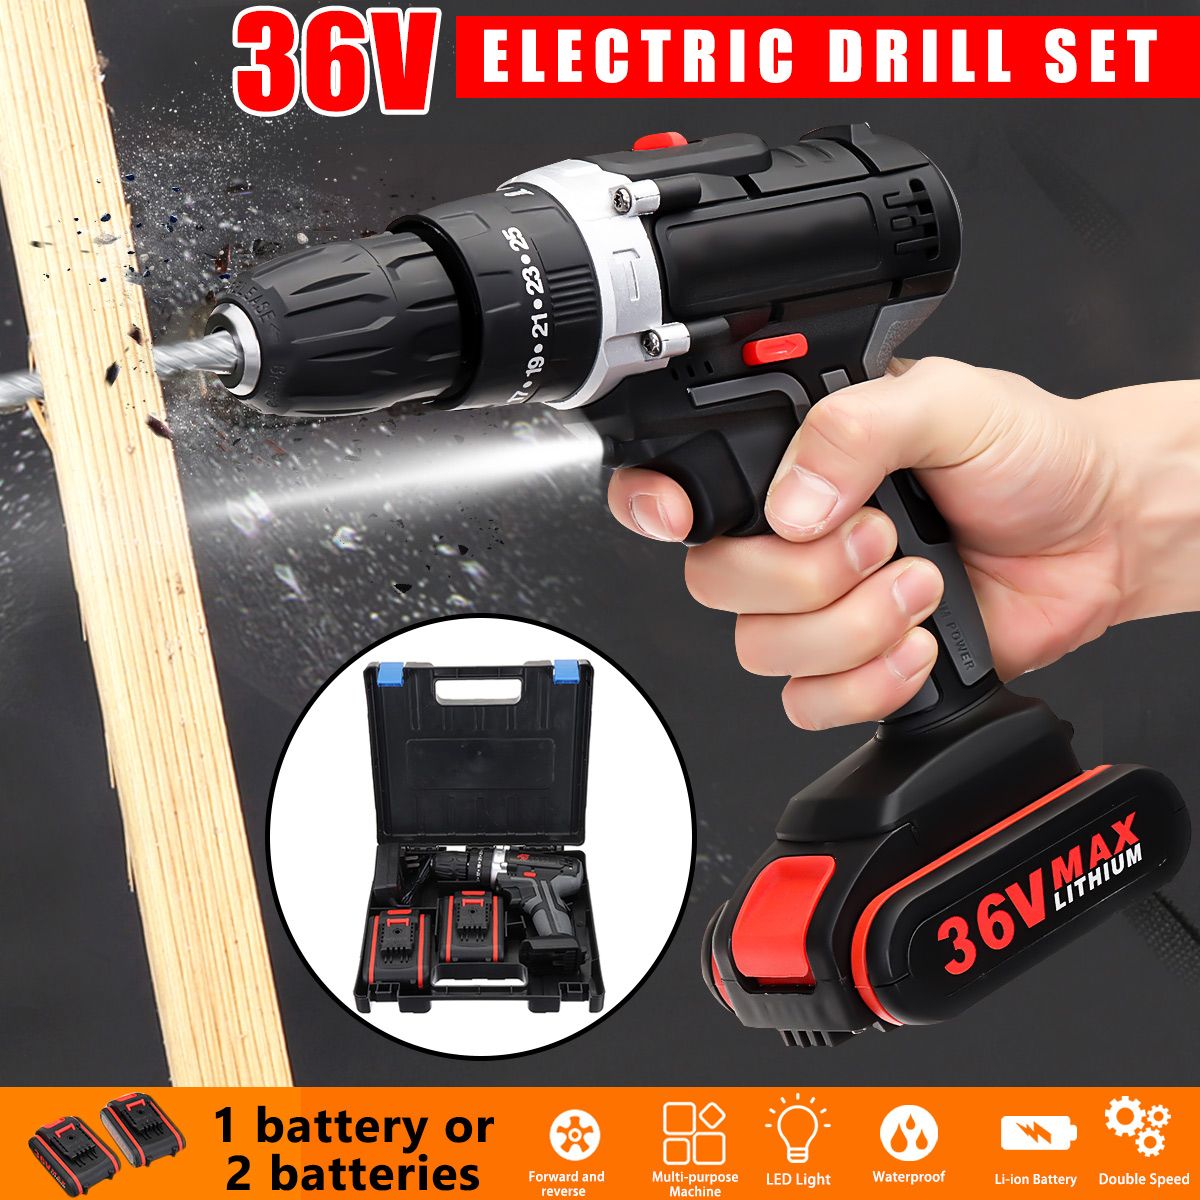 36V-25-28Nm-Electric-Power-Drills-Cordless-2-speed-Variable-with-LI-ION-Rechargeable-Battery-Kit-1408802